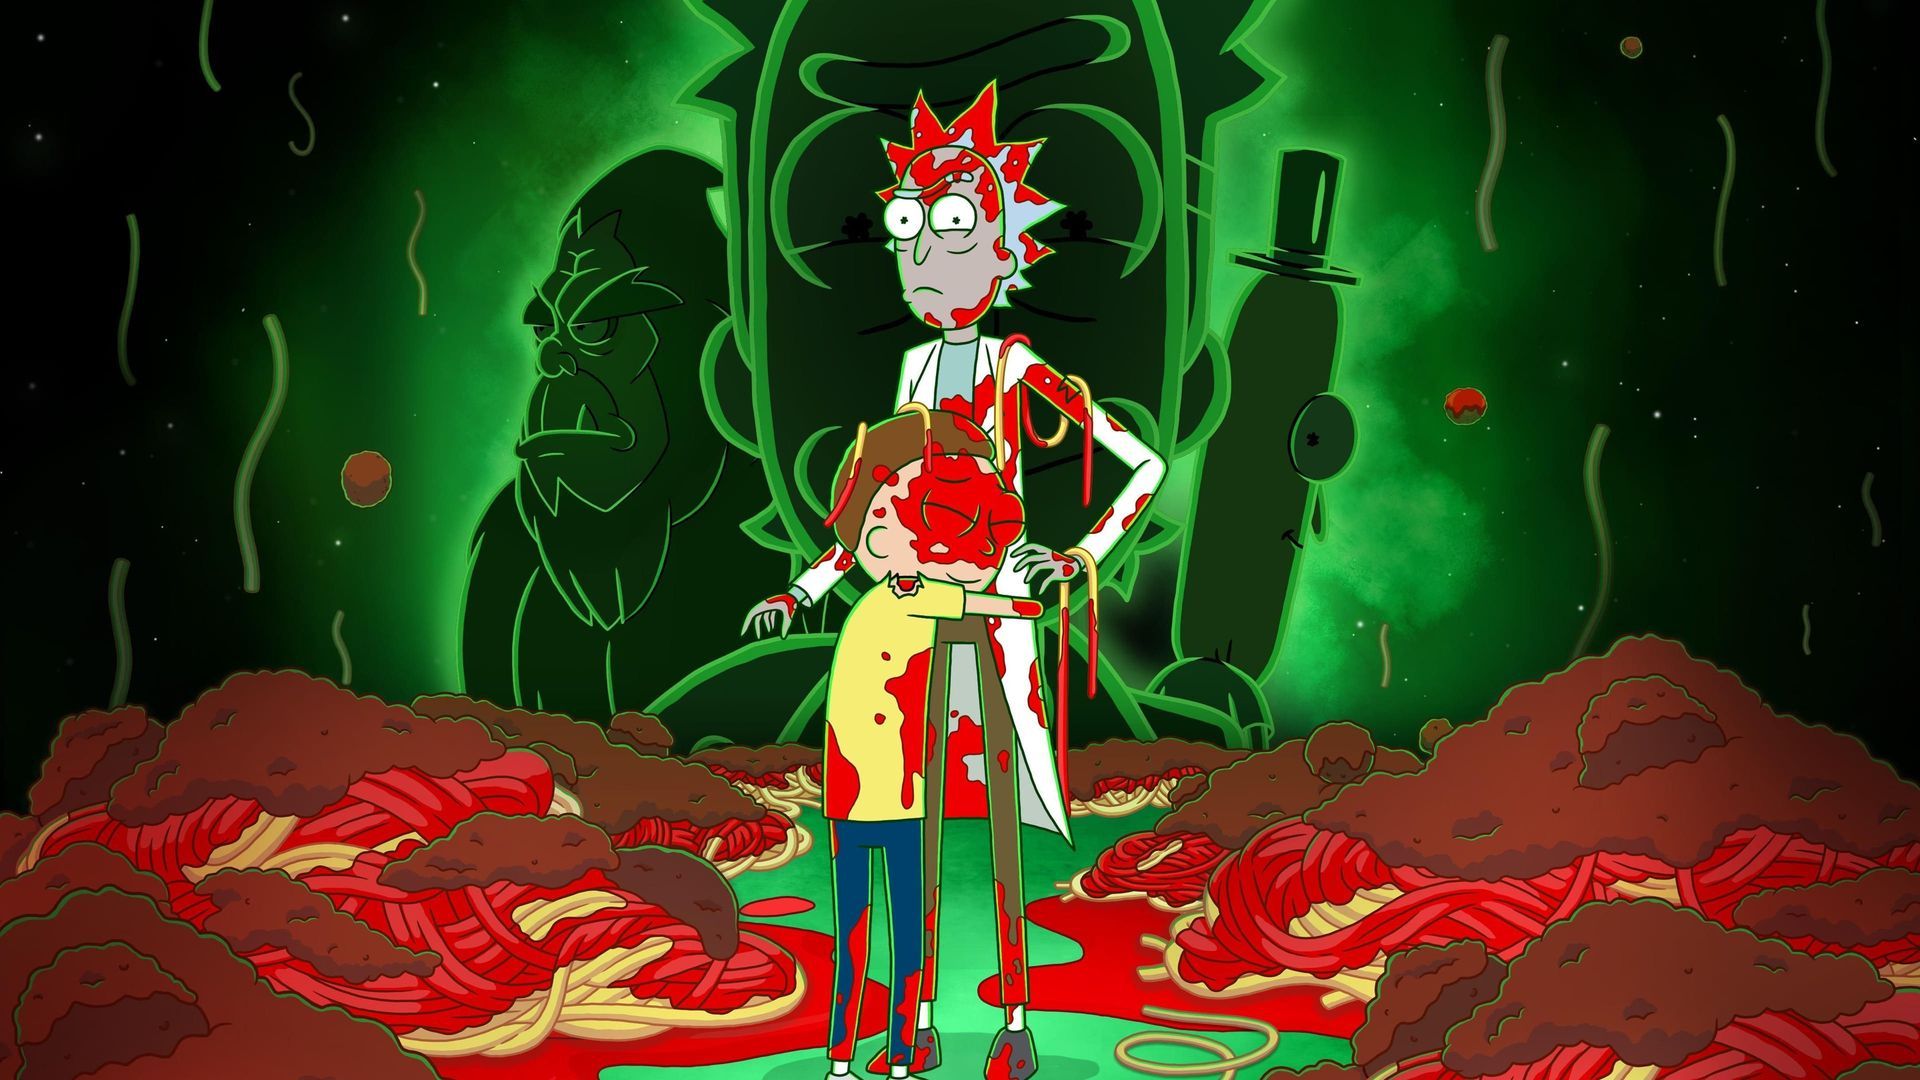 Rick and Morty season 7, episode 2 live stream: Watch online